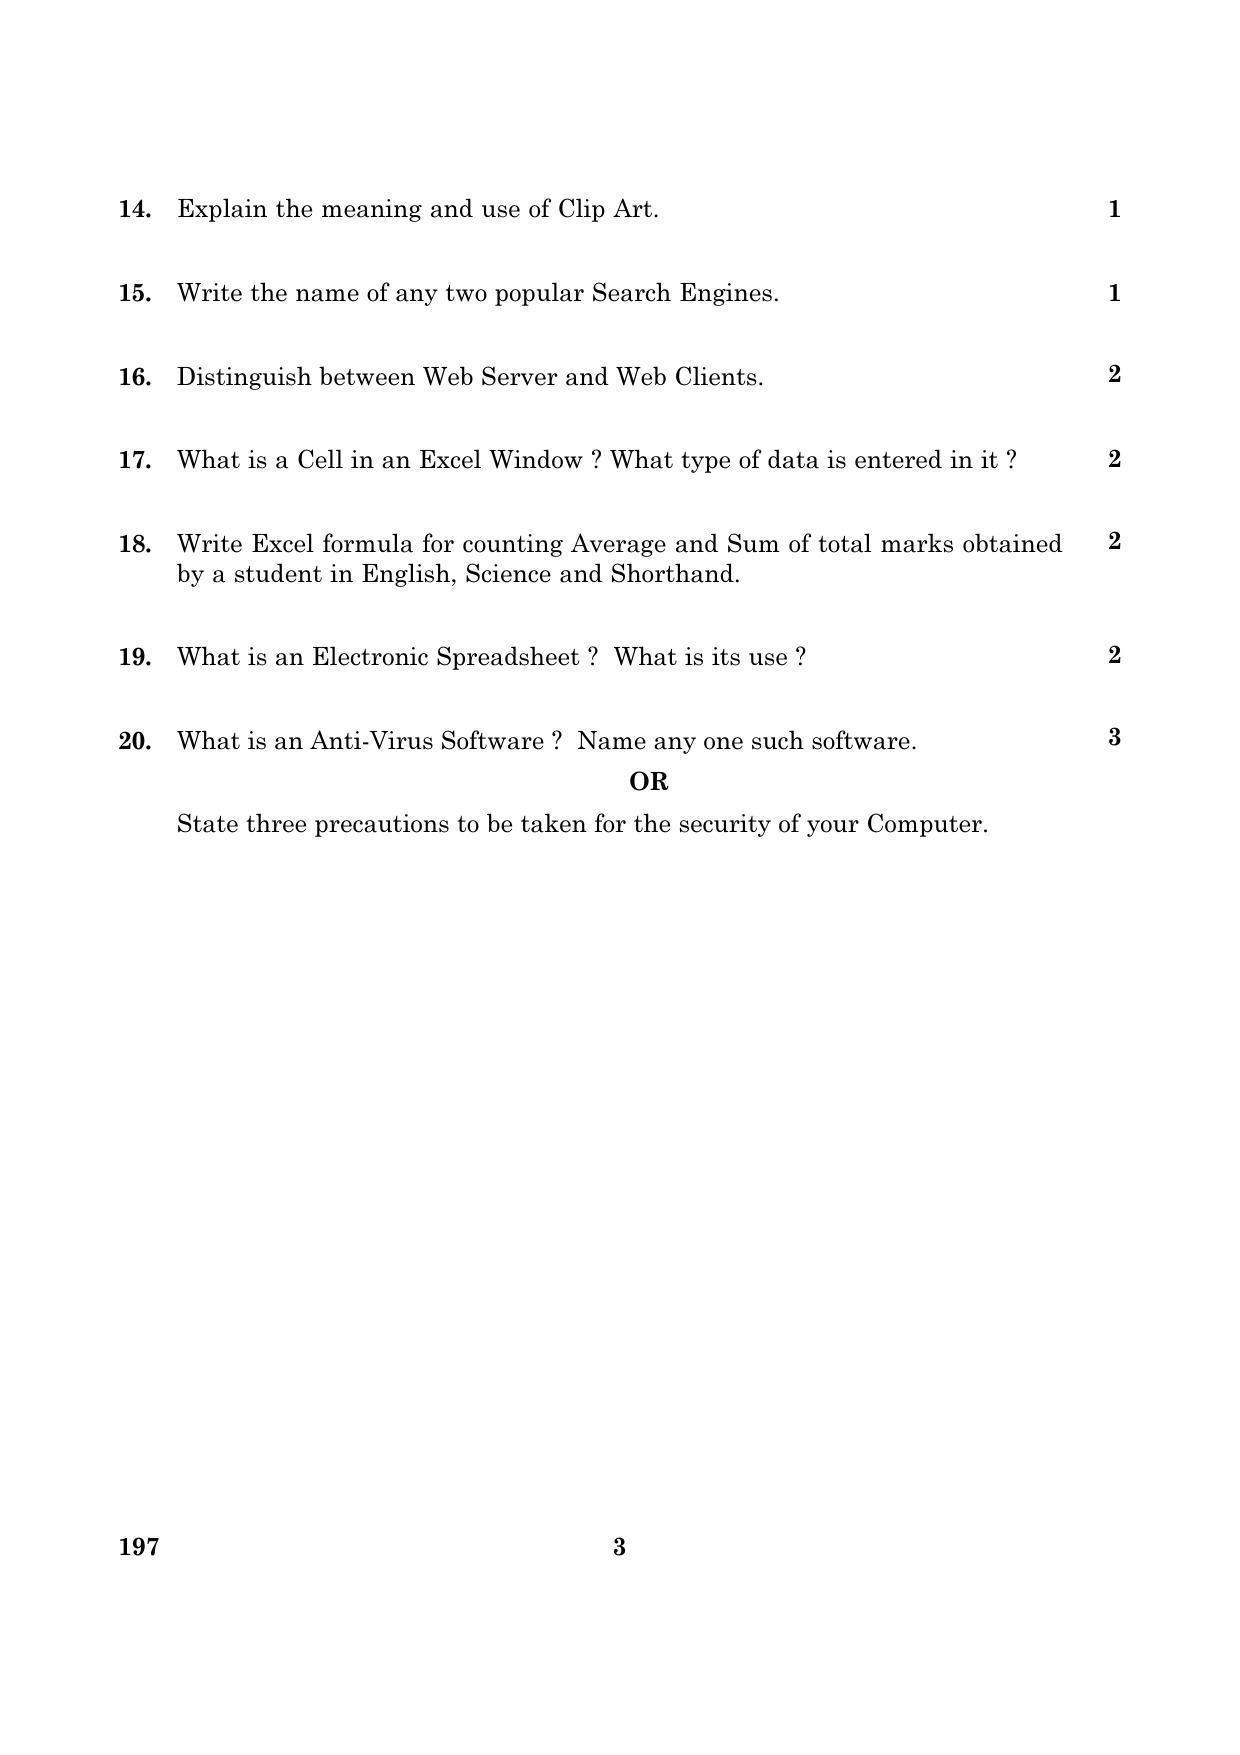 CBSE Class 12 197 TYPOGRAPHY & COMPUTER APPLICATION 2016 Question Paper - Page 3